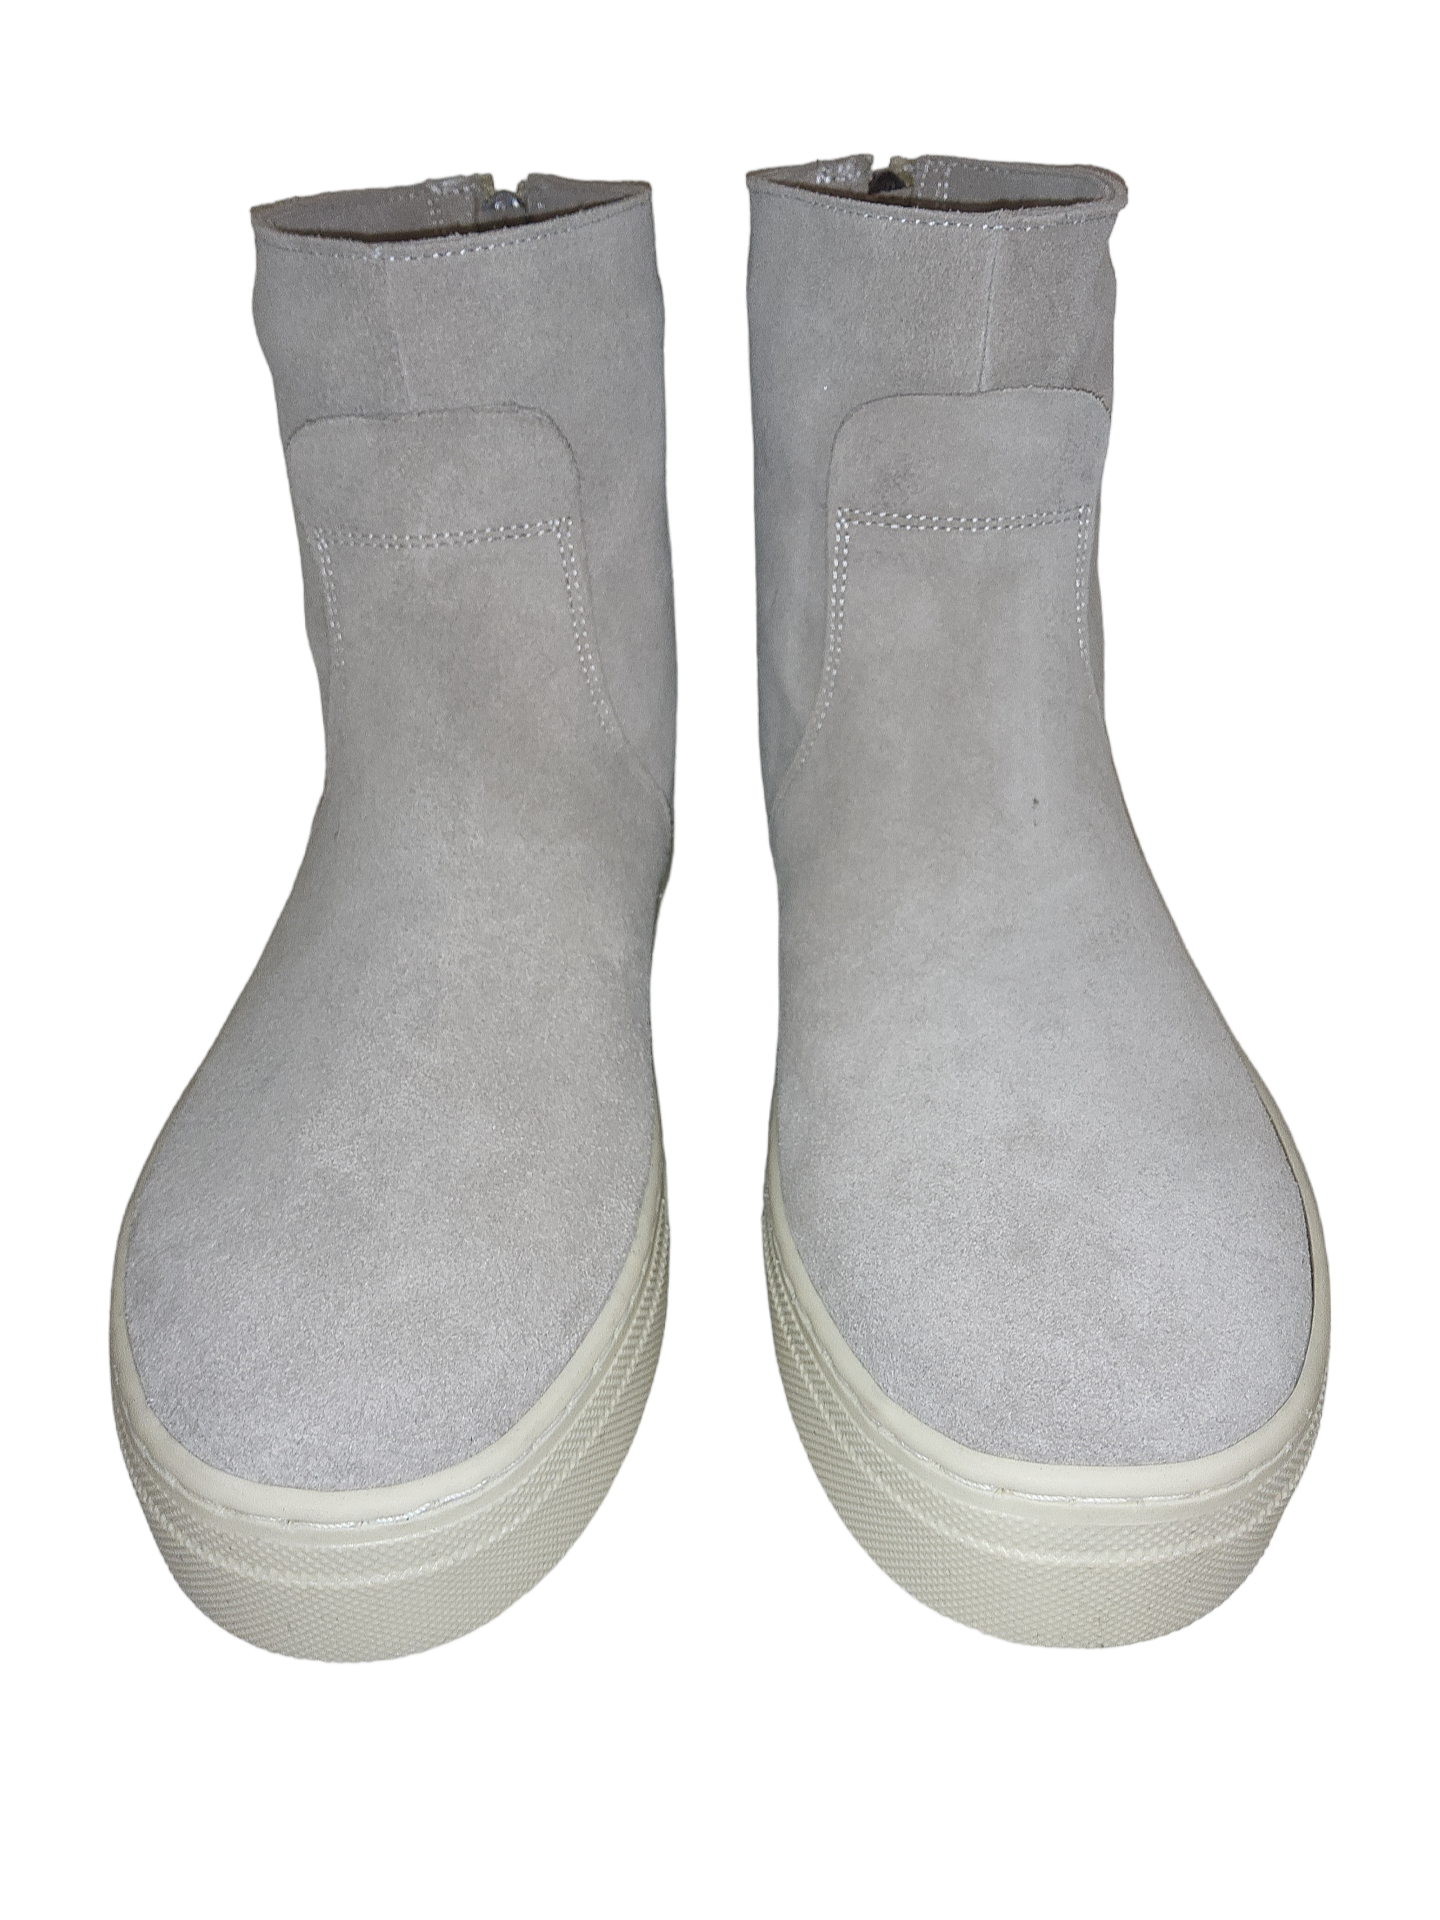 Grey suede leather boots